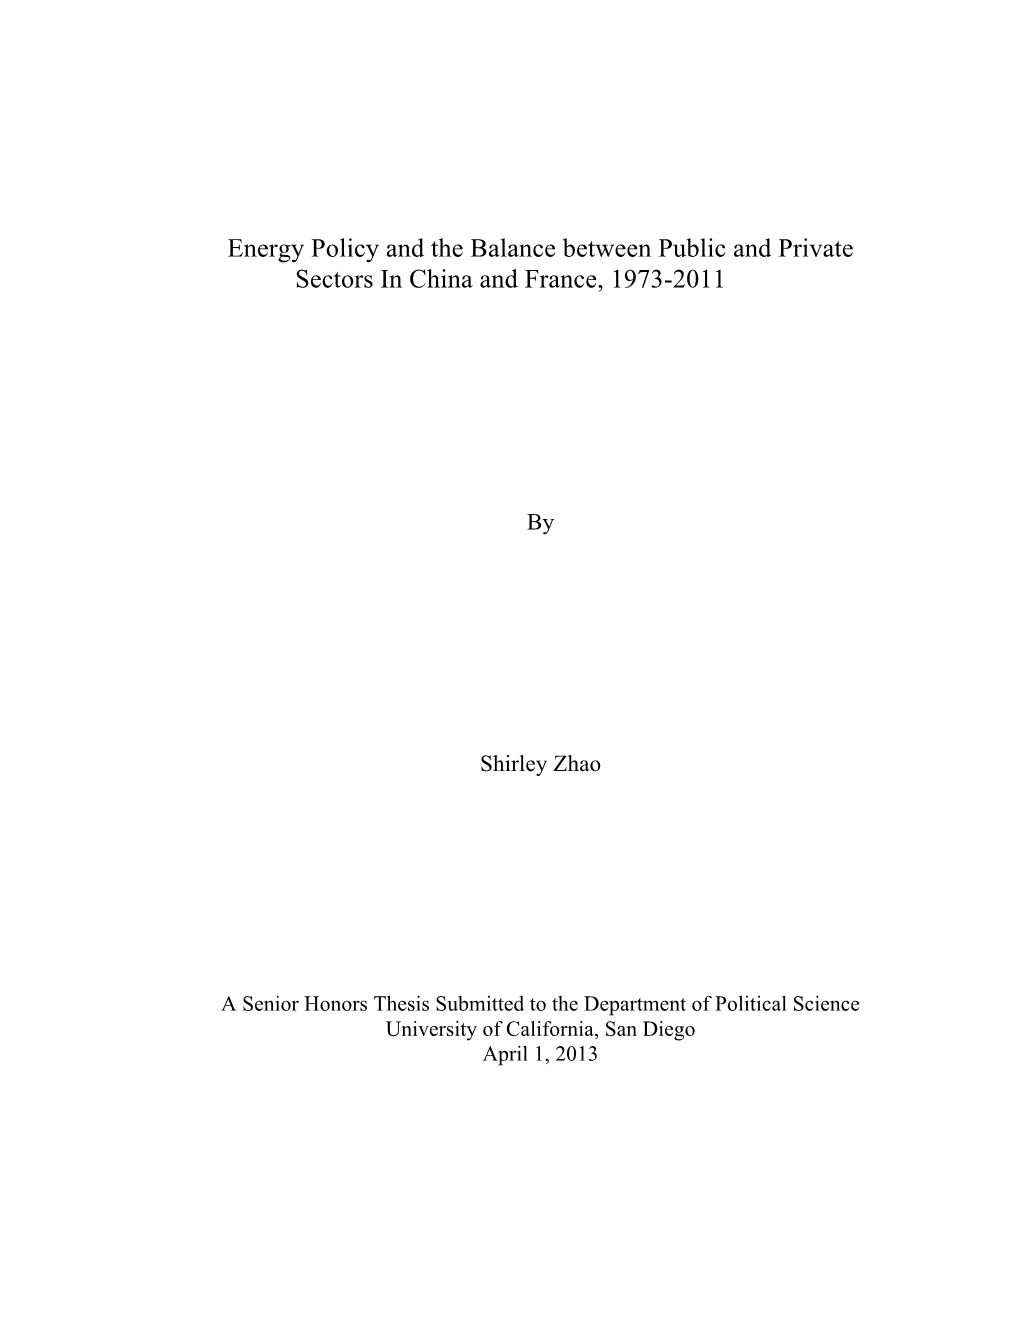 Energy Policy and the Balance Between Public and Private Sectors in China and France, 1973-2011